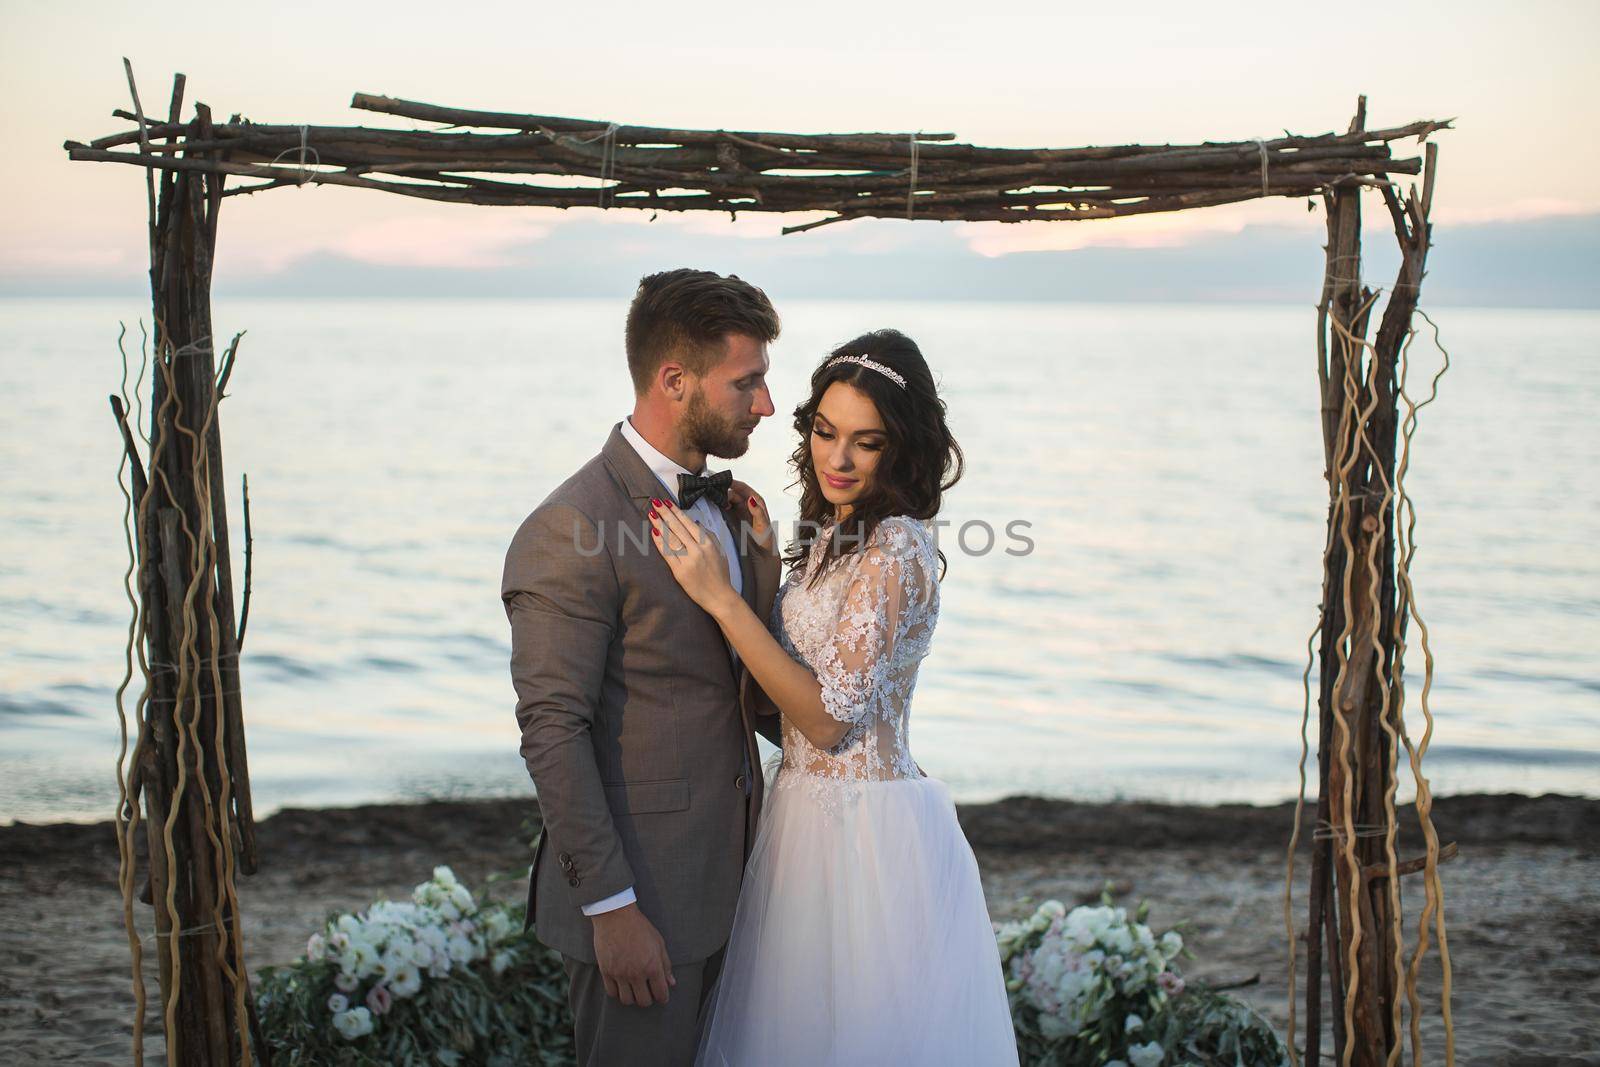 The bride and groom under archway on beach. Sunset, twilight by StudioPeace